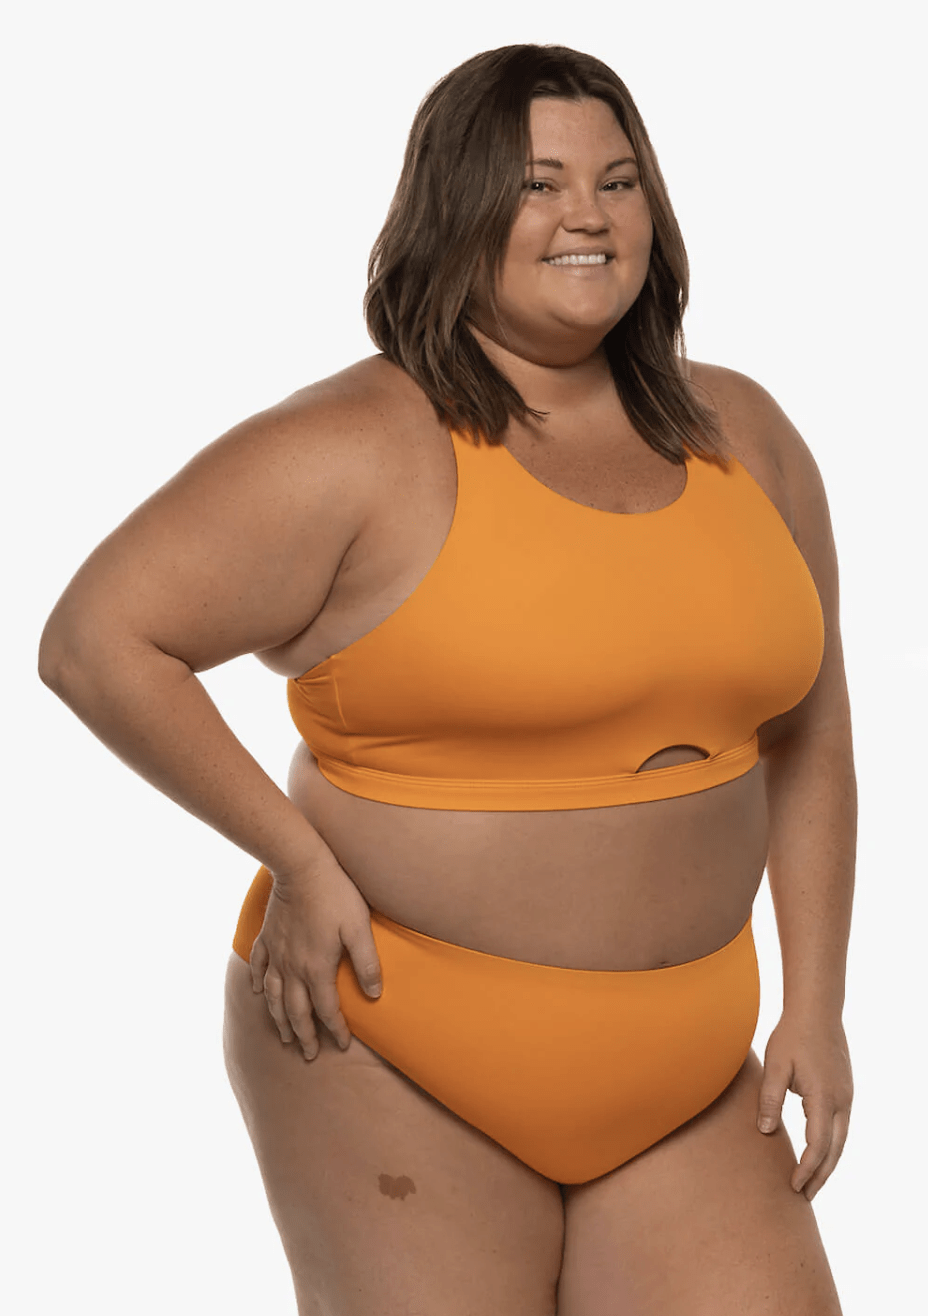 Plus Size Woman Shares Brilliant Bikini Hack for Big Belly Babes